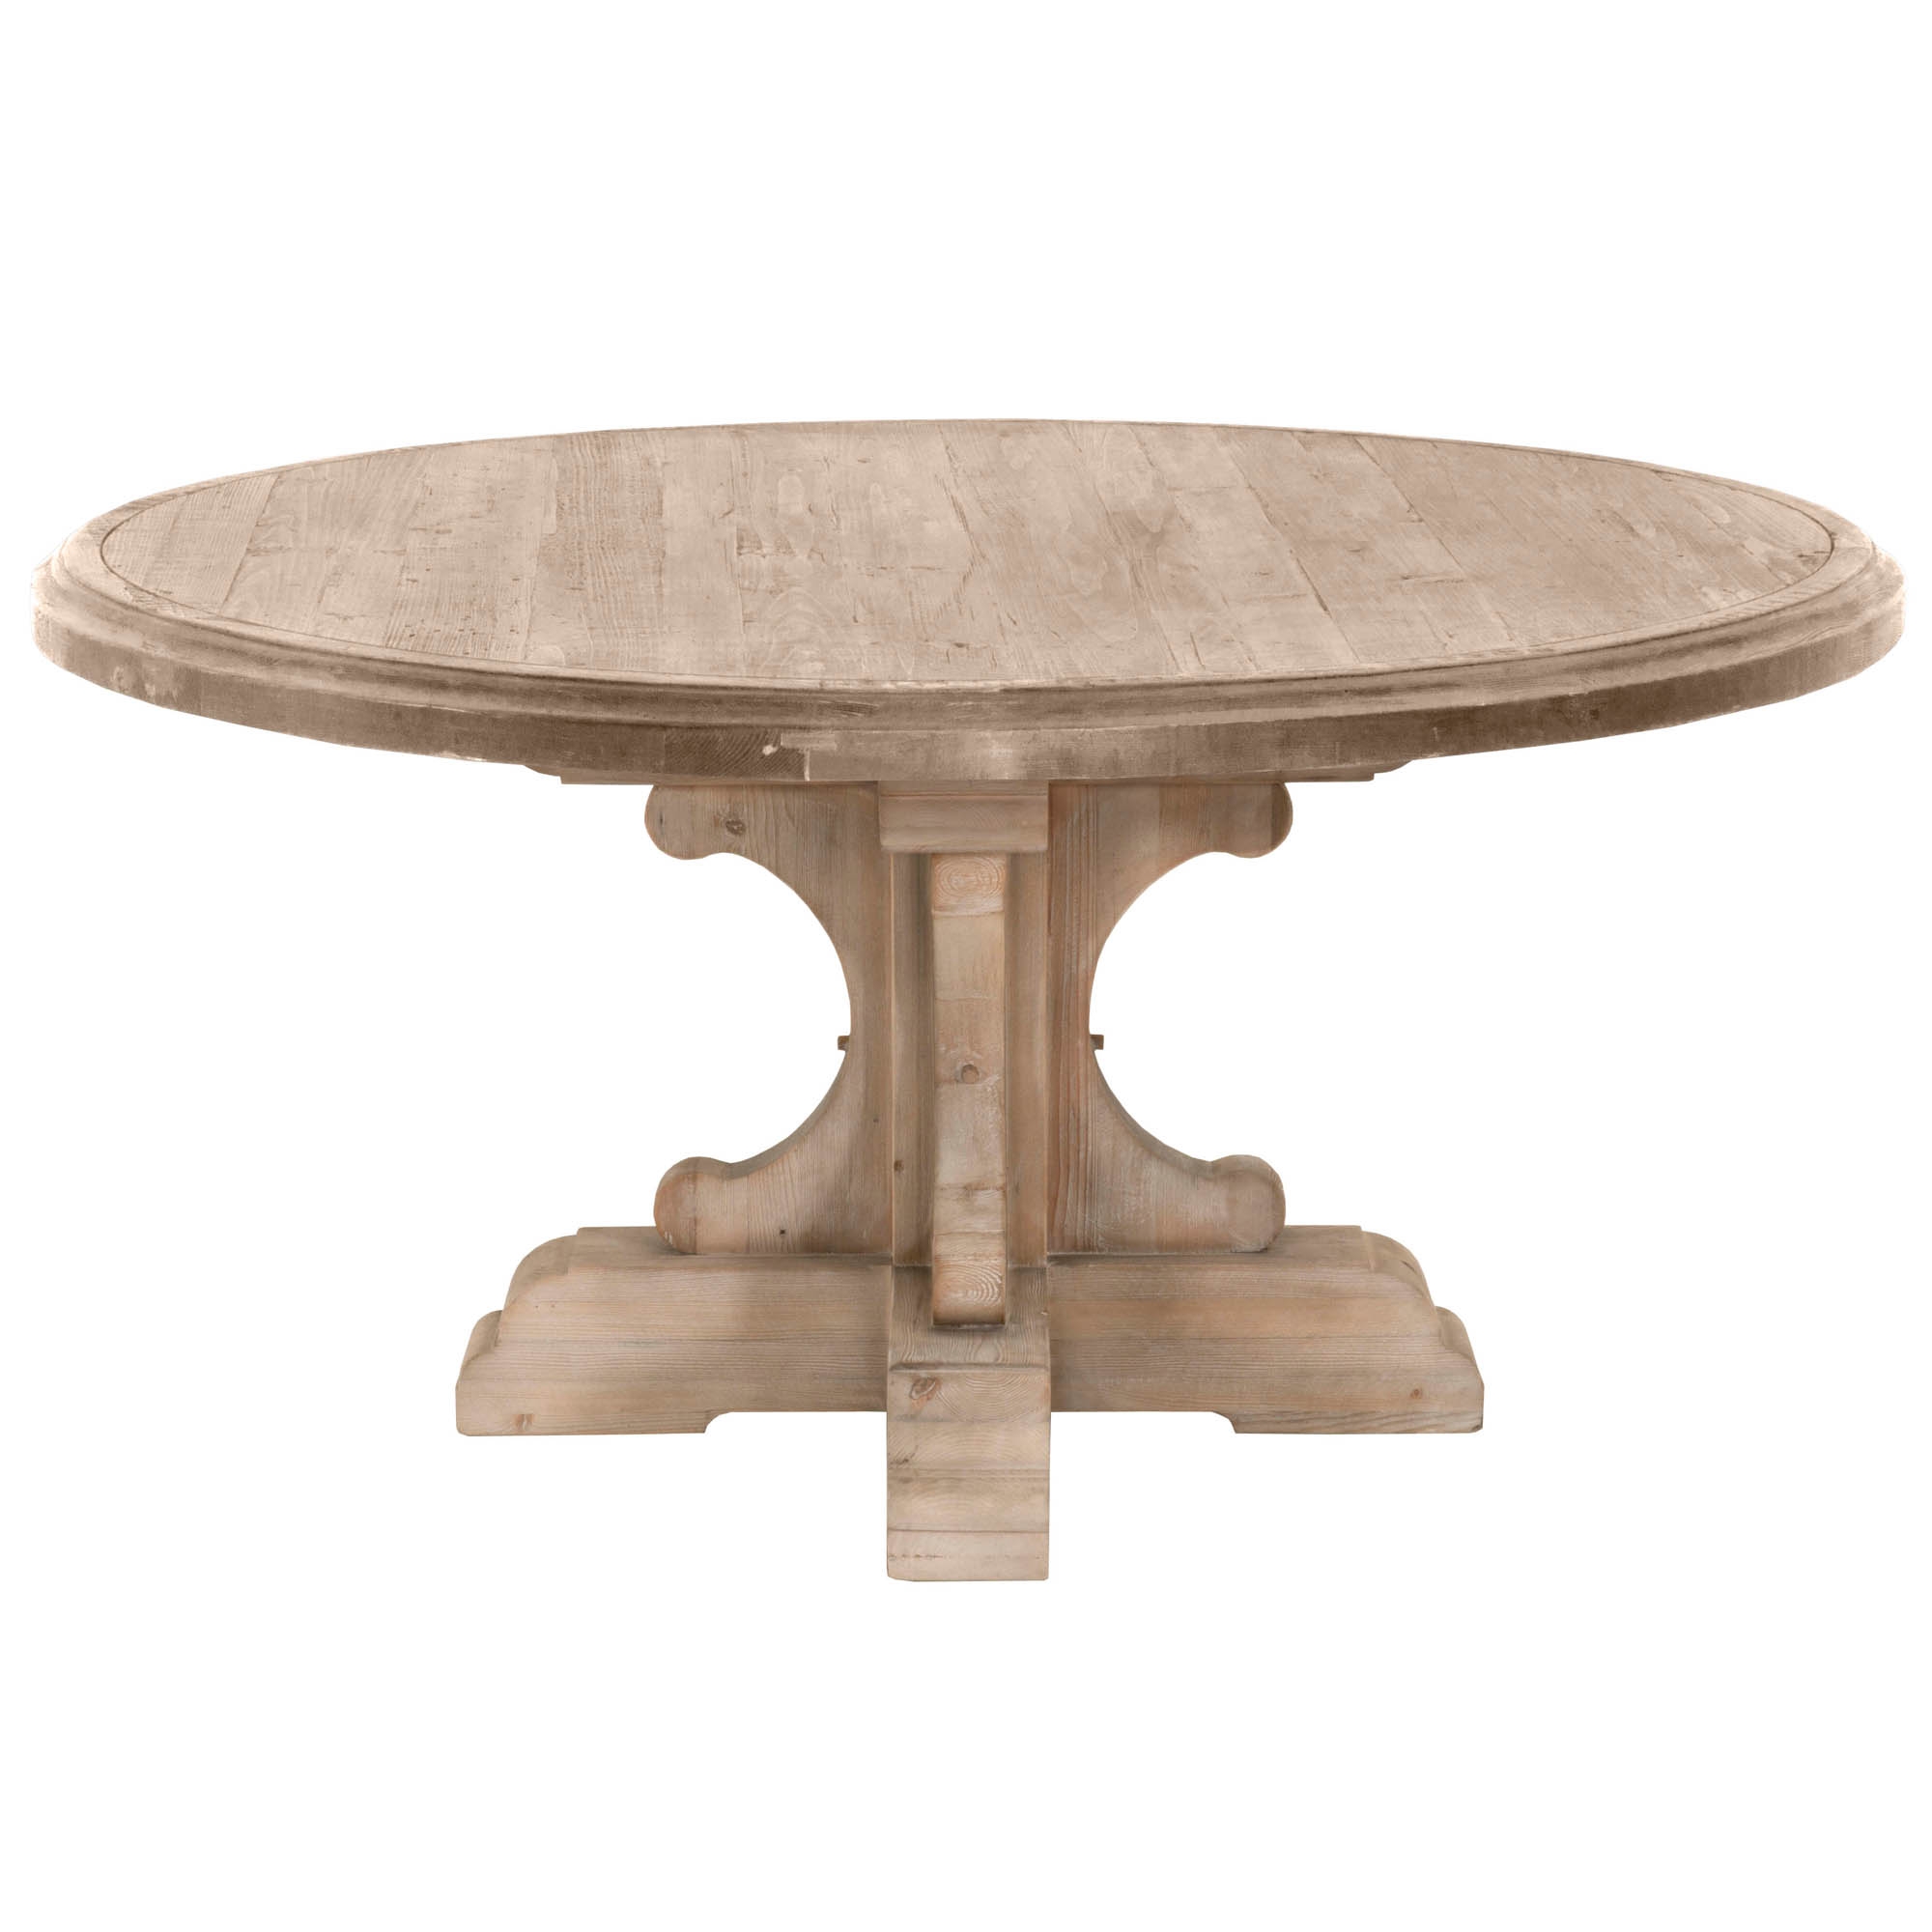 Bastille 60" Round Dining Table Top - Image 1